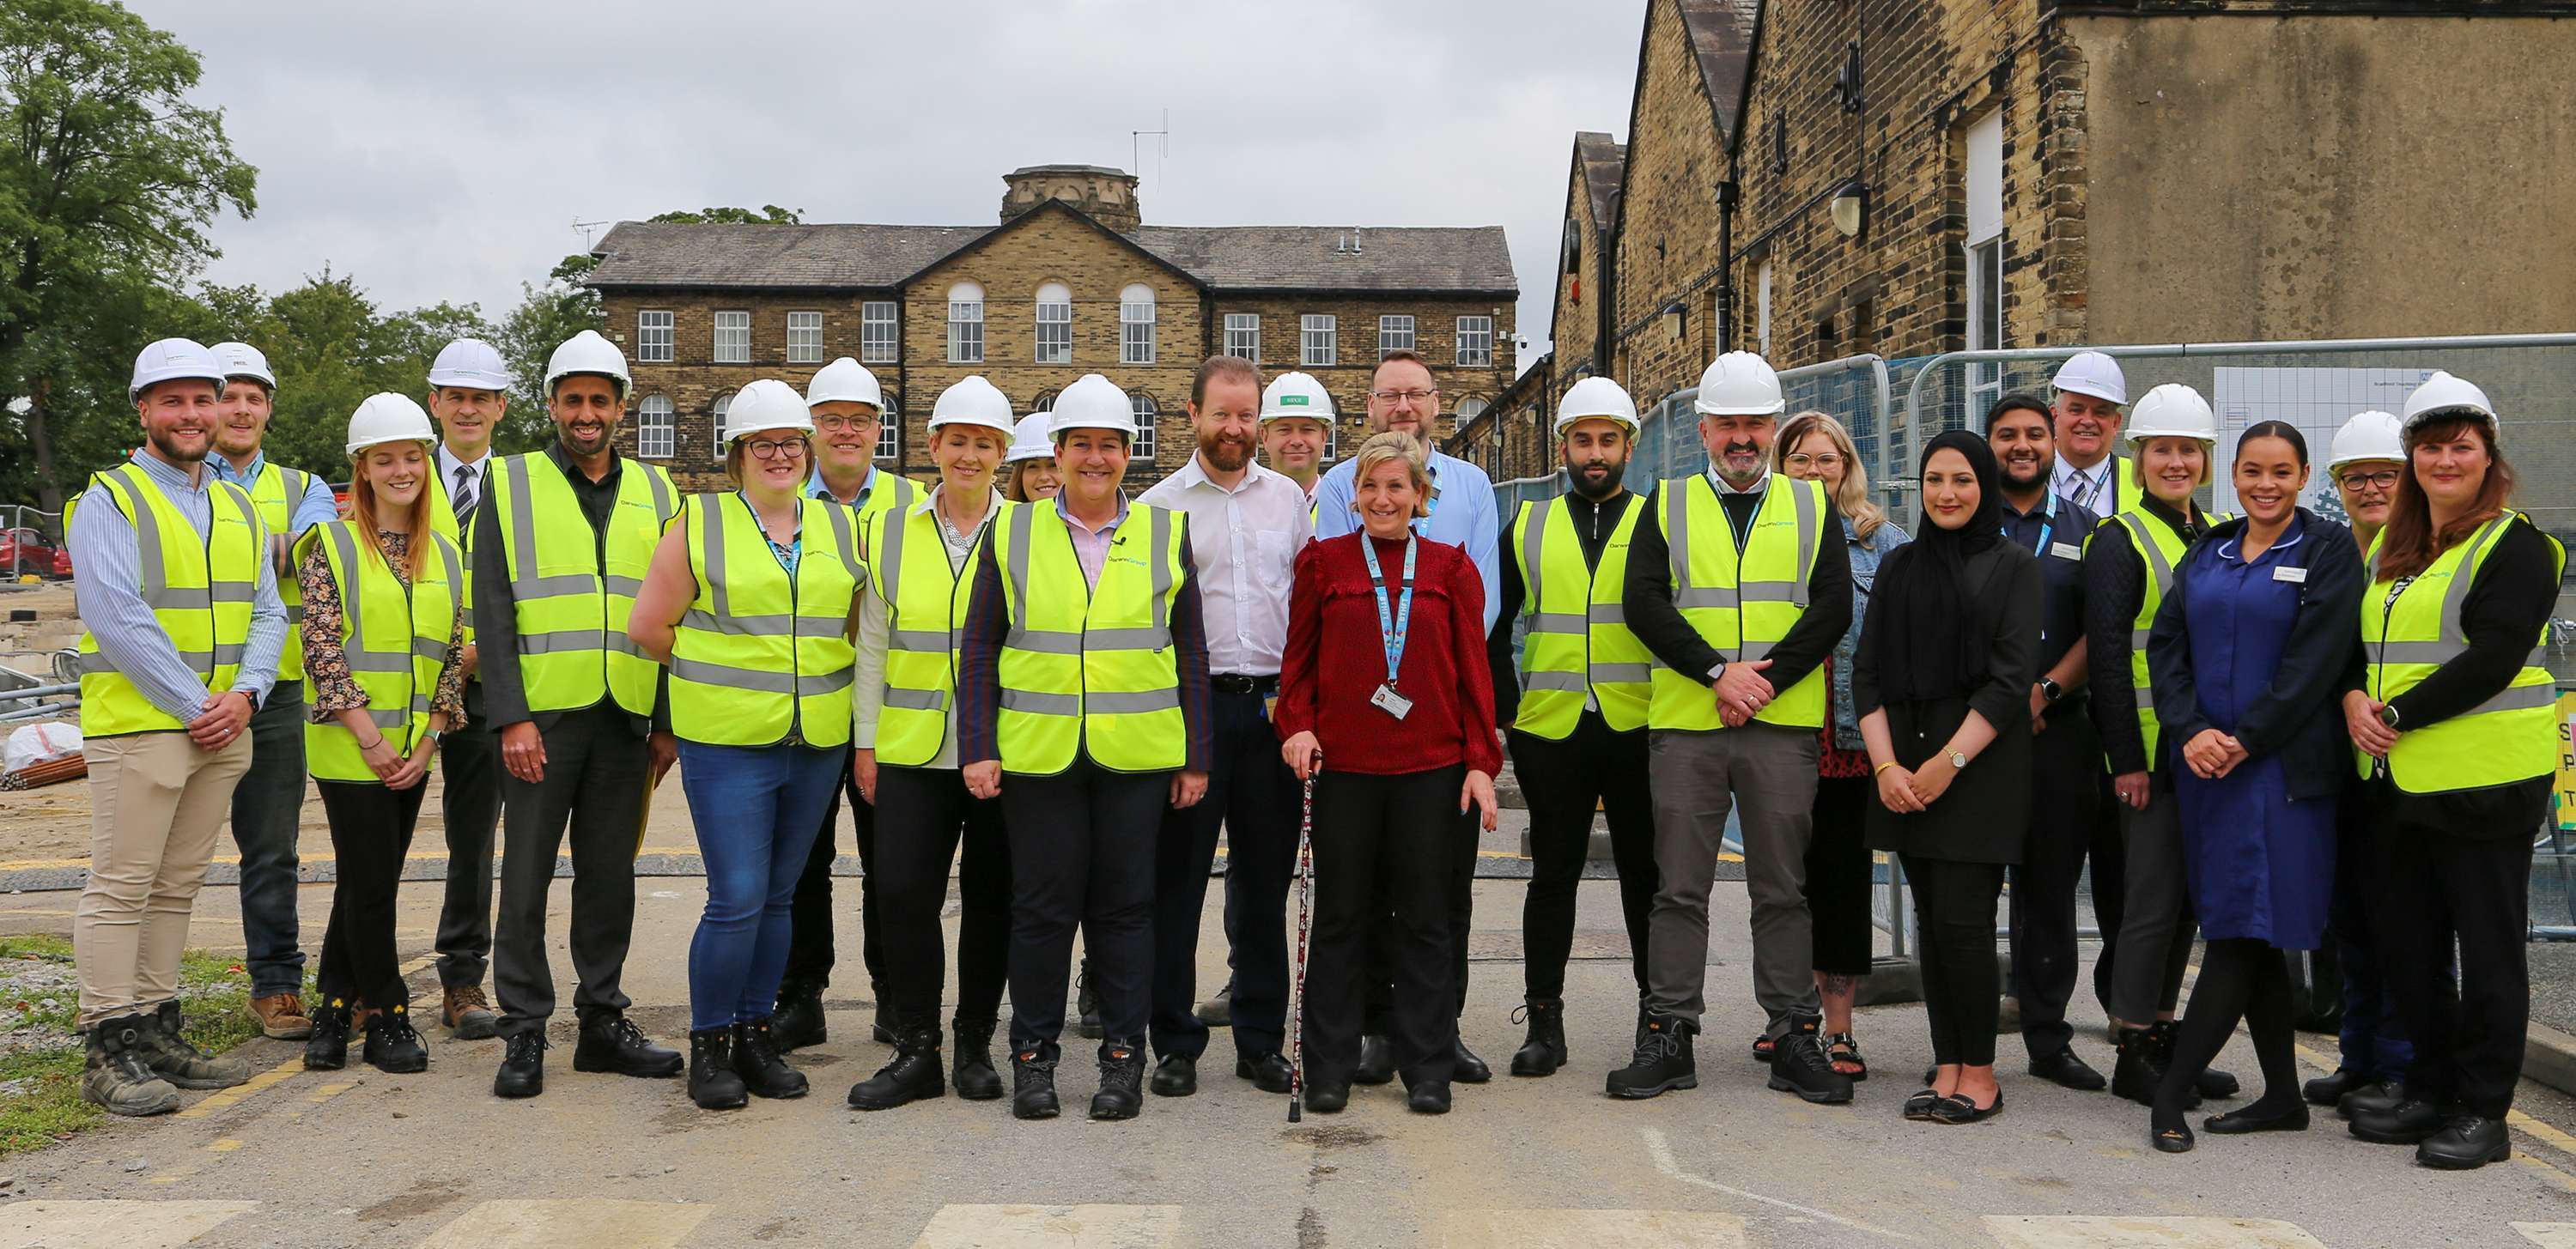 Group photo of the NHS Trust team, all wearing hi-vis and hard hats, on the site which will soon house the new Day Case Unit.